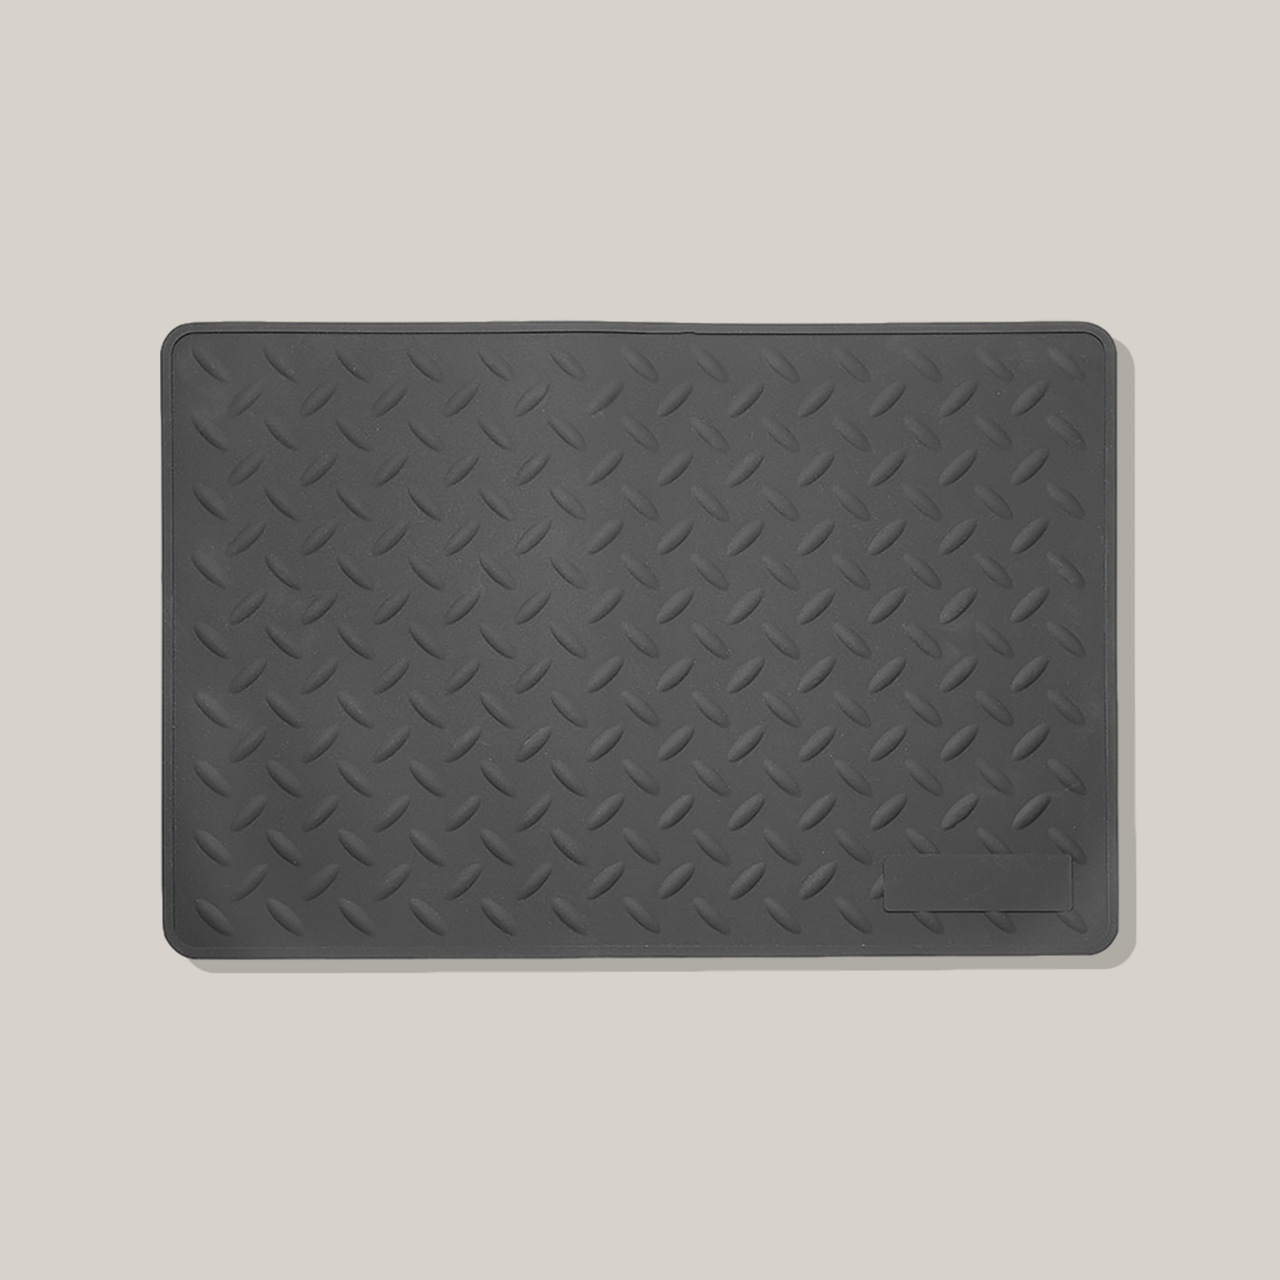 Dannyco PROTECTIVE SILICONE MAT 11X16 